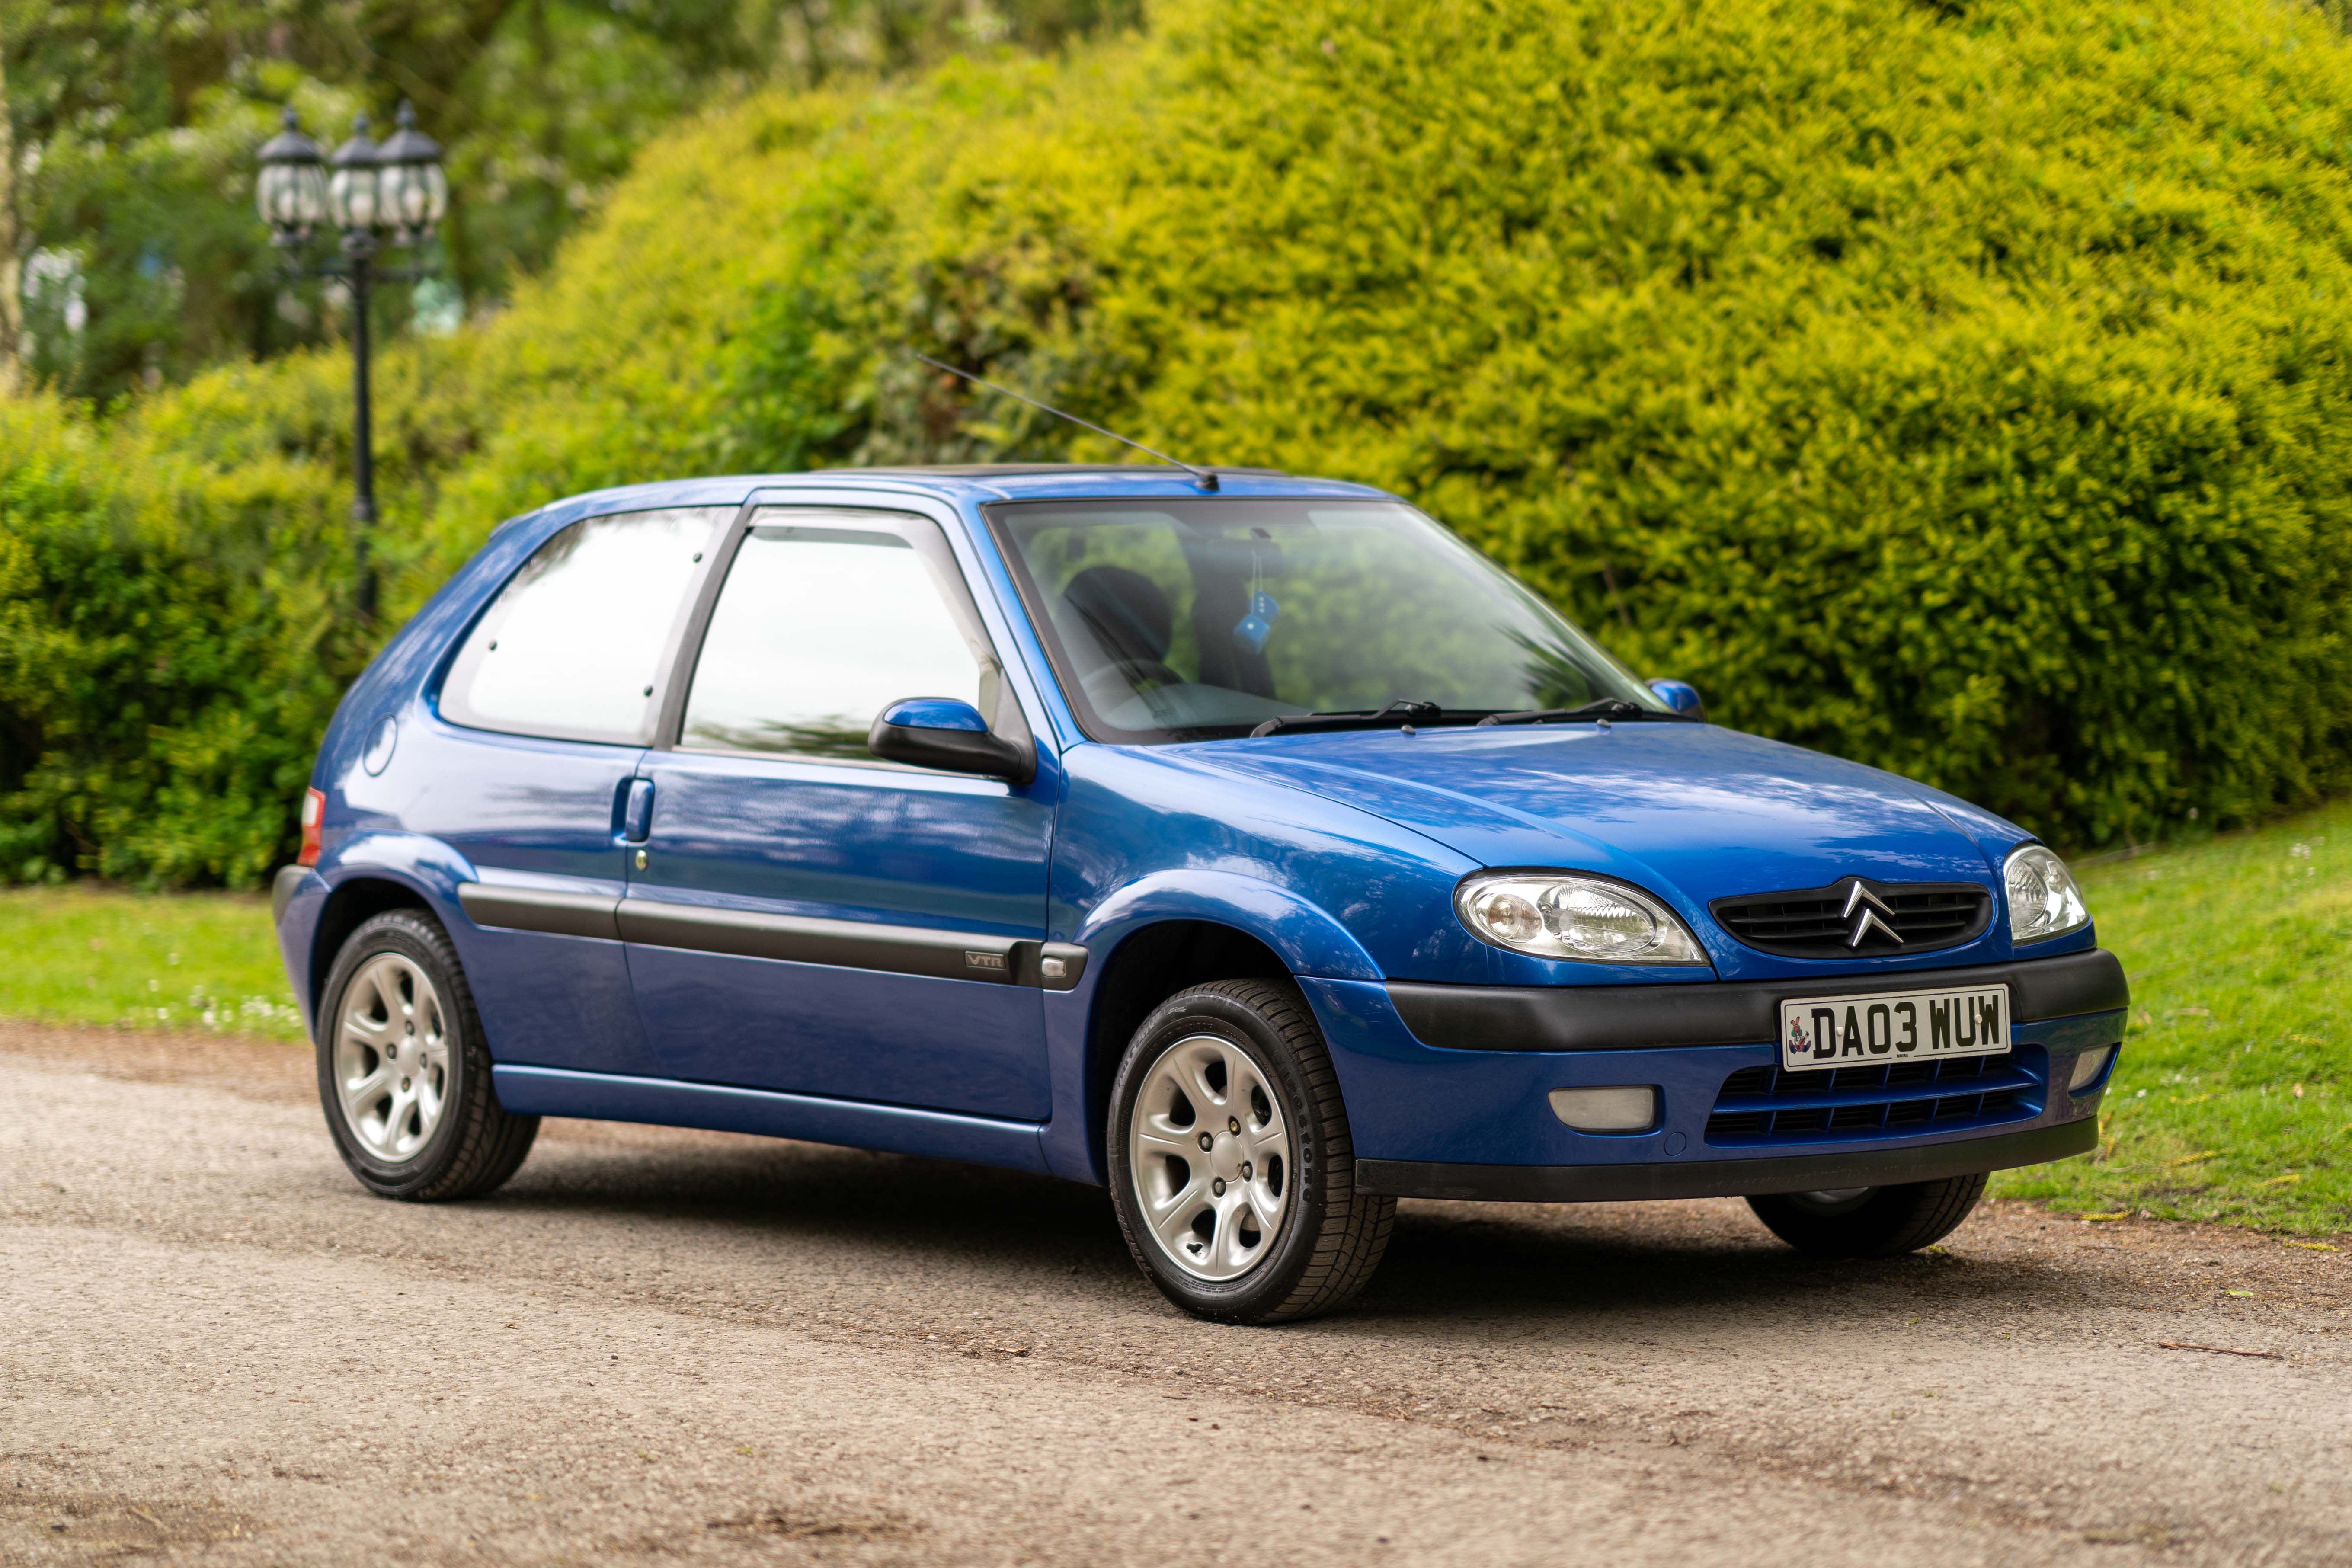 Citroen Saxo and original Ford Focus on way to becoming classics